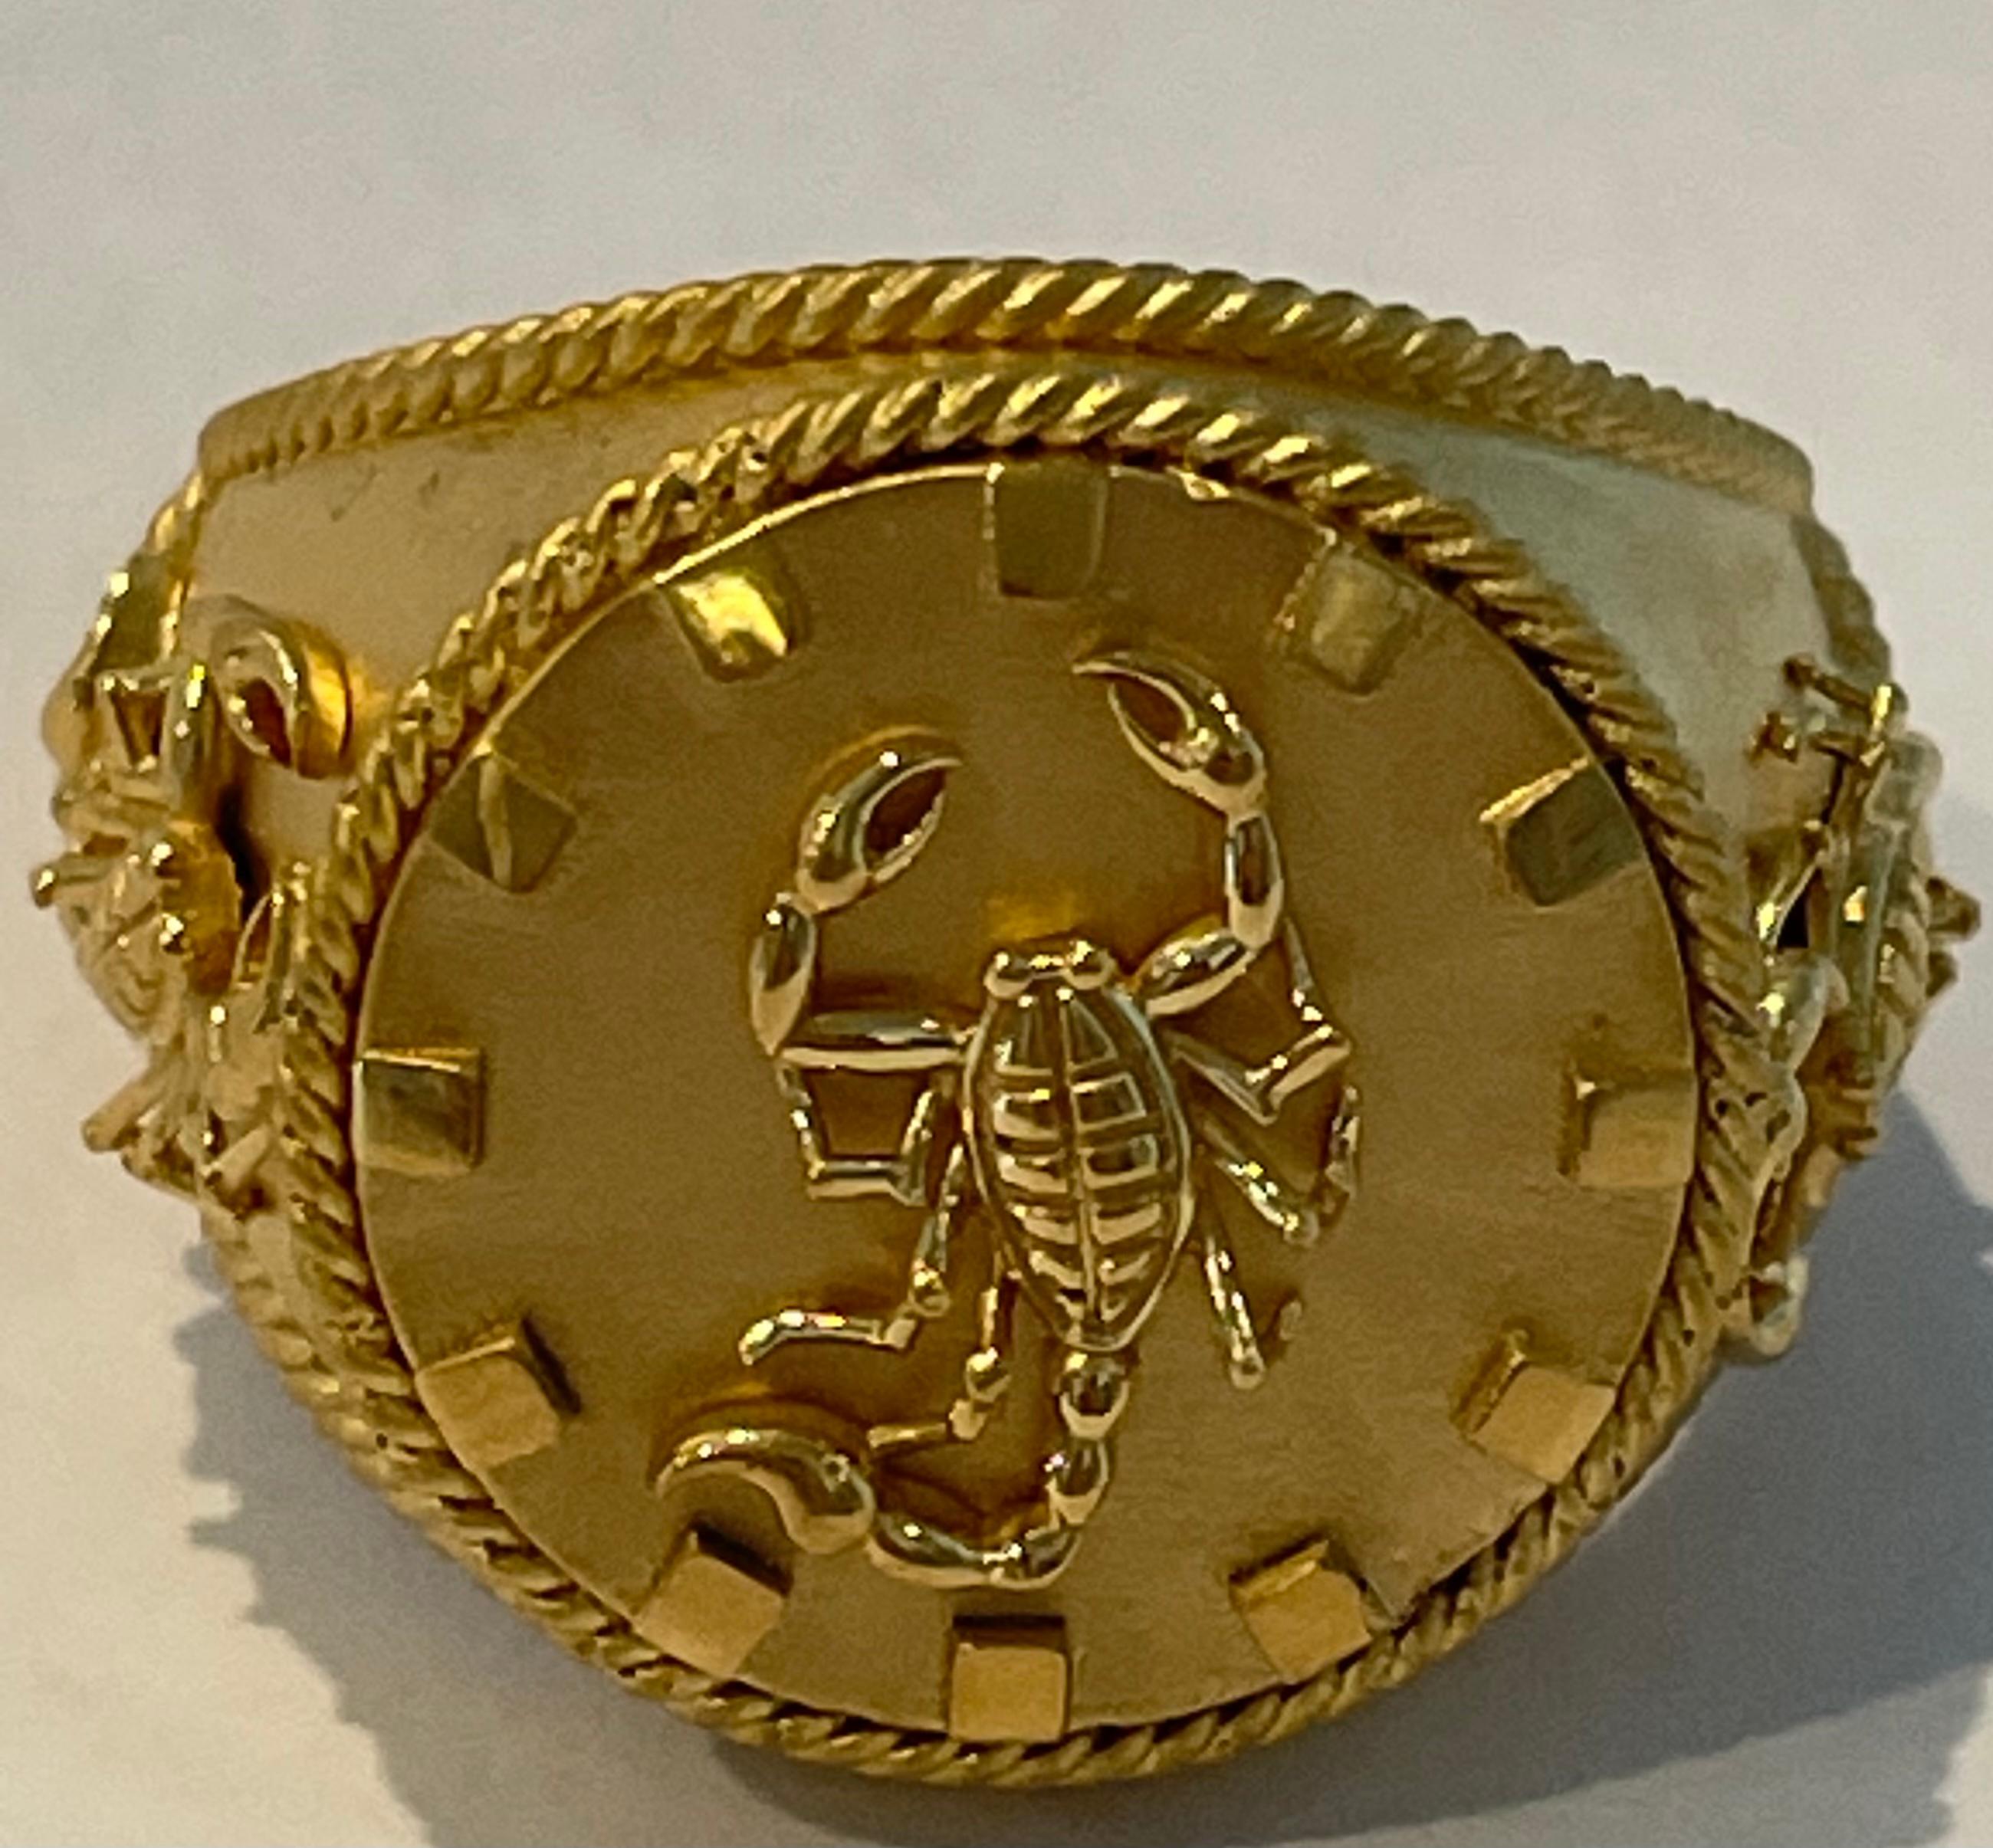 Zodiac Scorpion Ring in 22k Gold by Tagili In New Condition For Sale In New York, NY